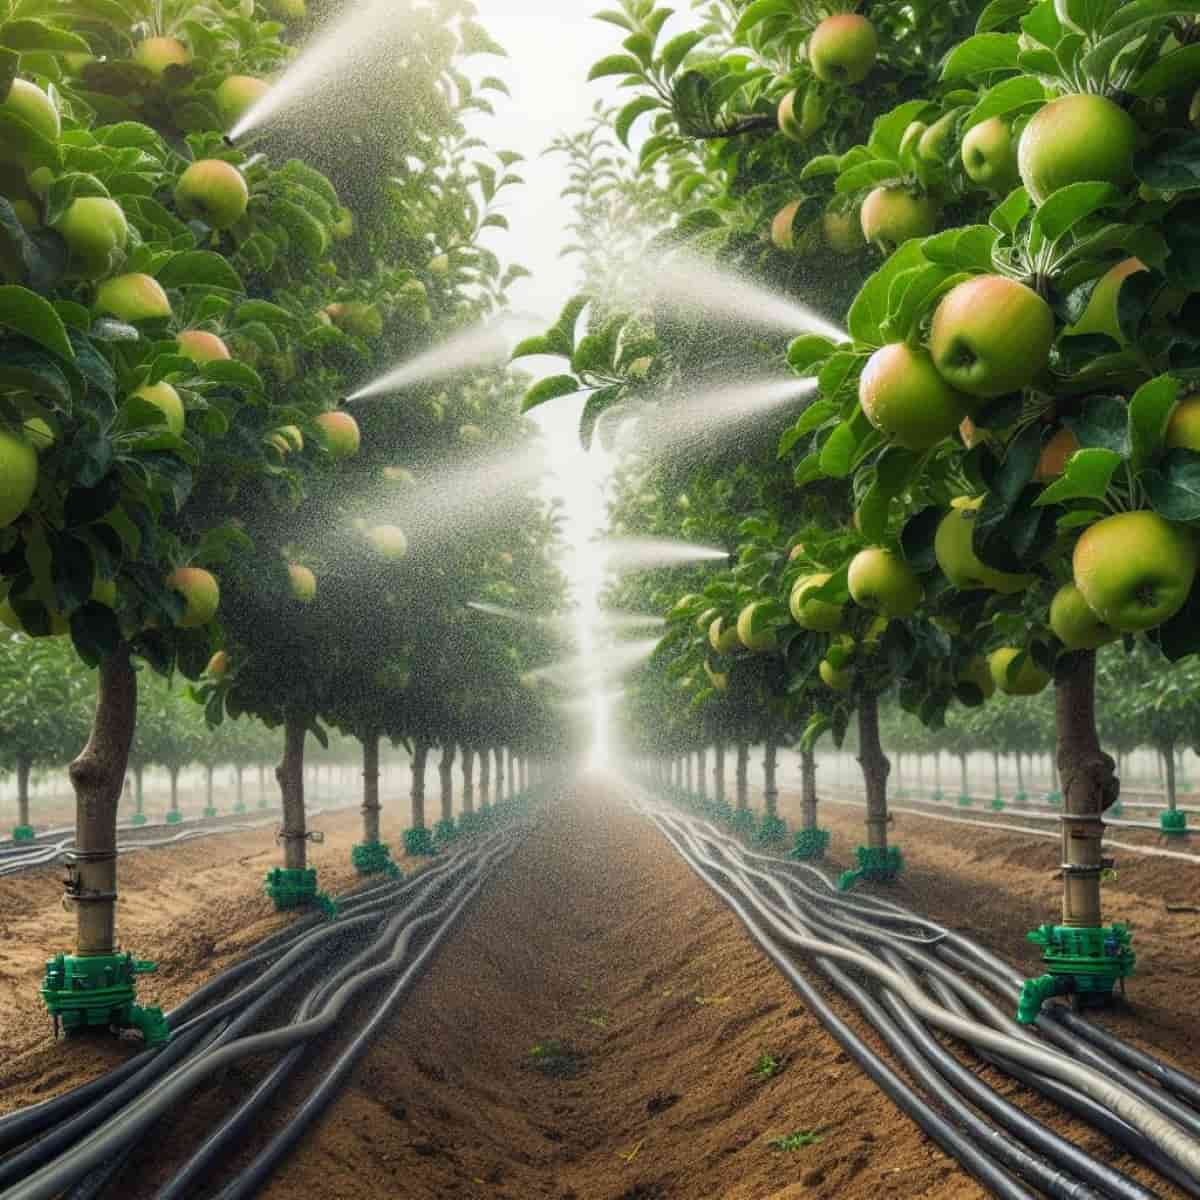 Cost of Drip Irrigation per Acre for Apple Plantation